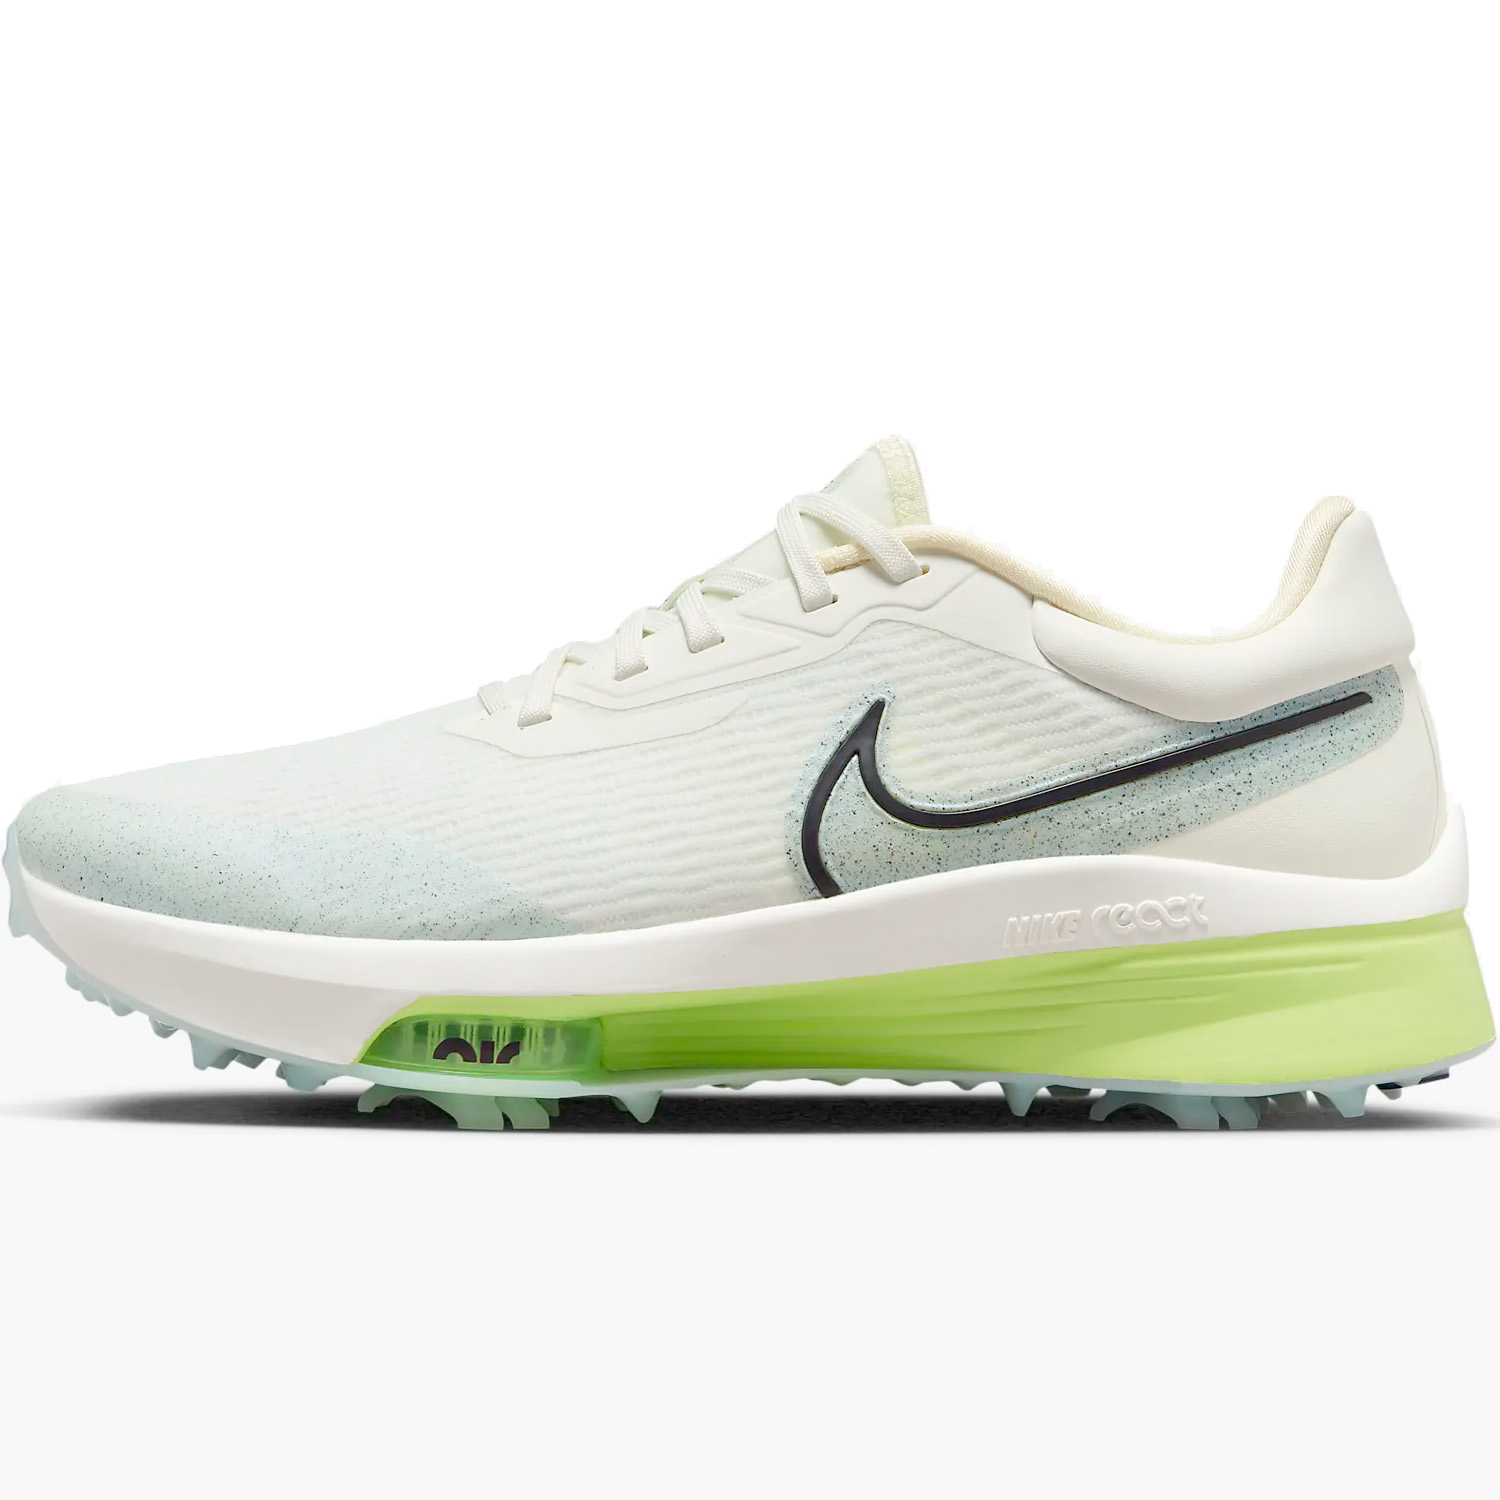 Nike Air Zoom Infinity Tour NEXT% Golf Shoes Sail/Barely Green/Coconut ...